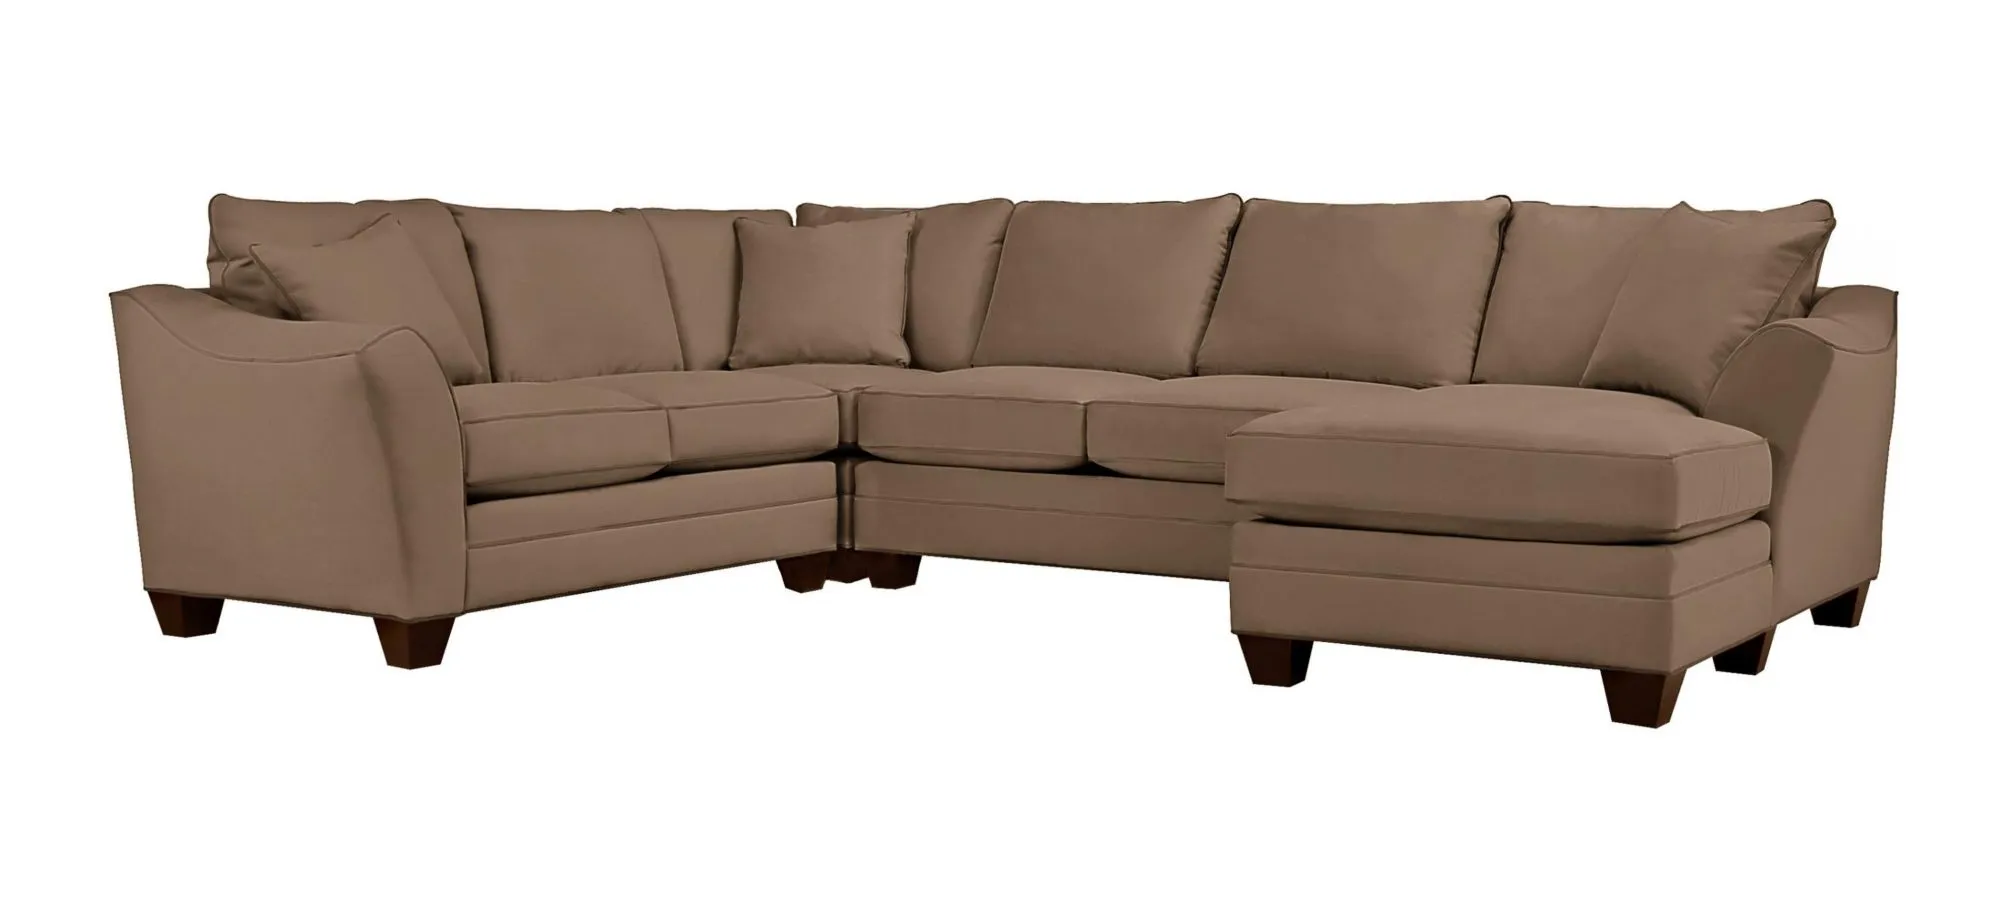 Foresthill 4-pc. Sectional w/ Right Arm Facing Chaise in Suede So Soft Khaki by H.M. Richards